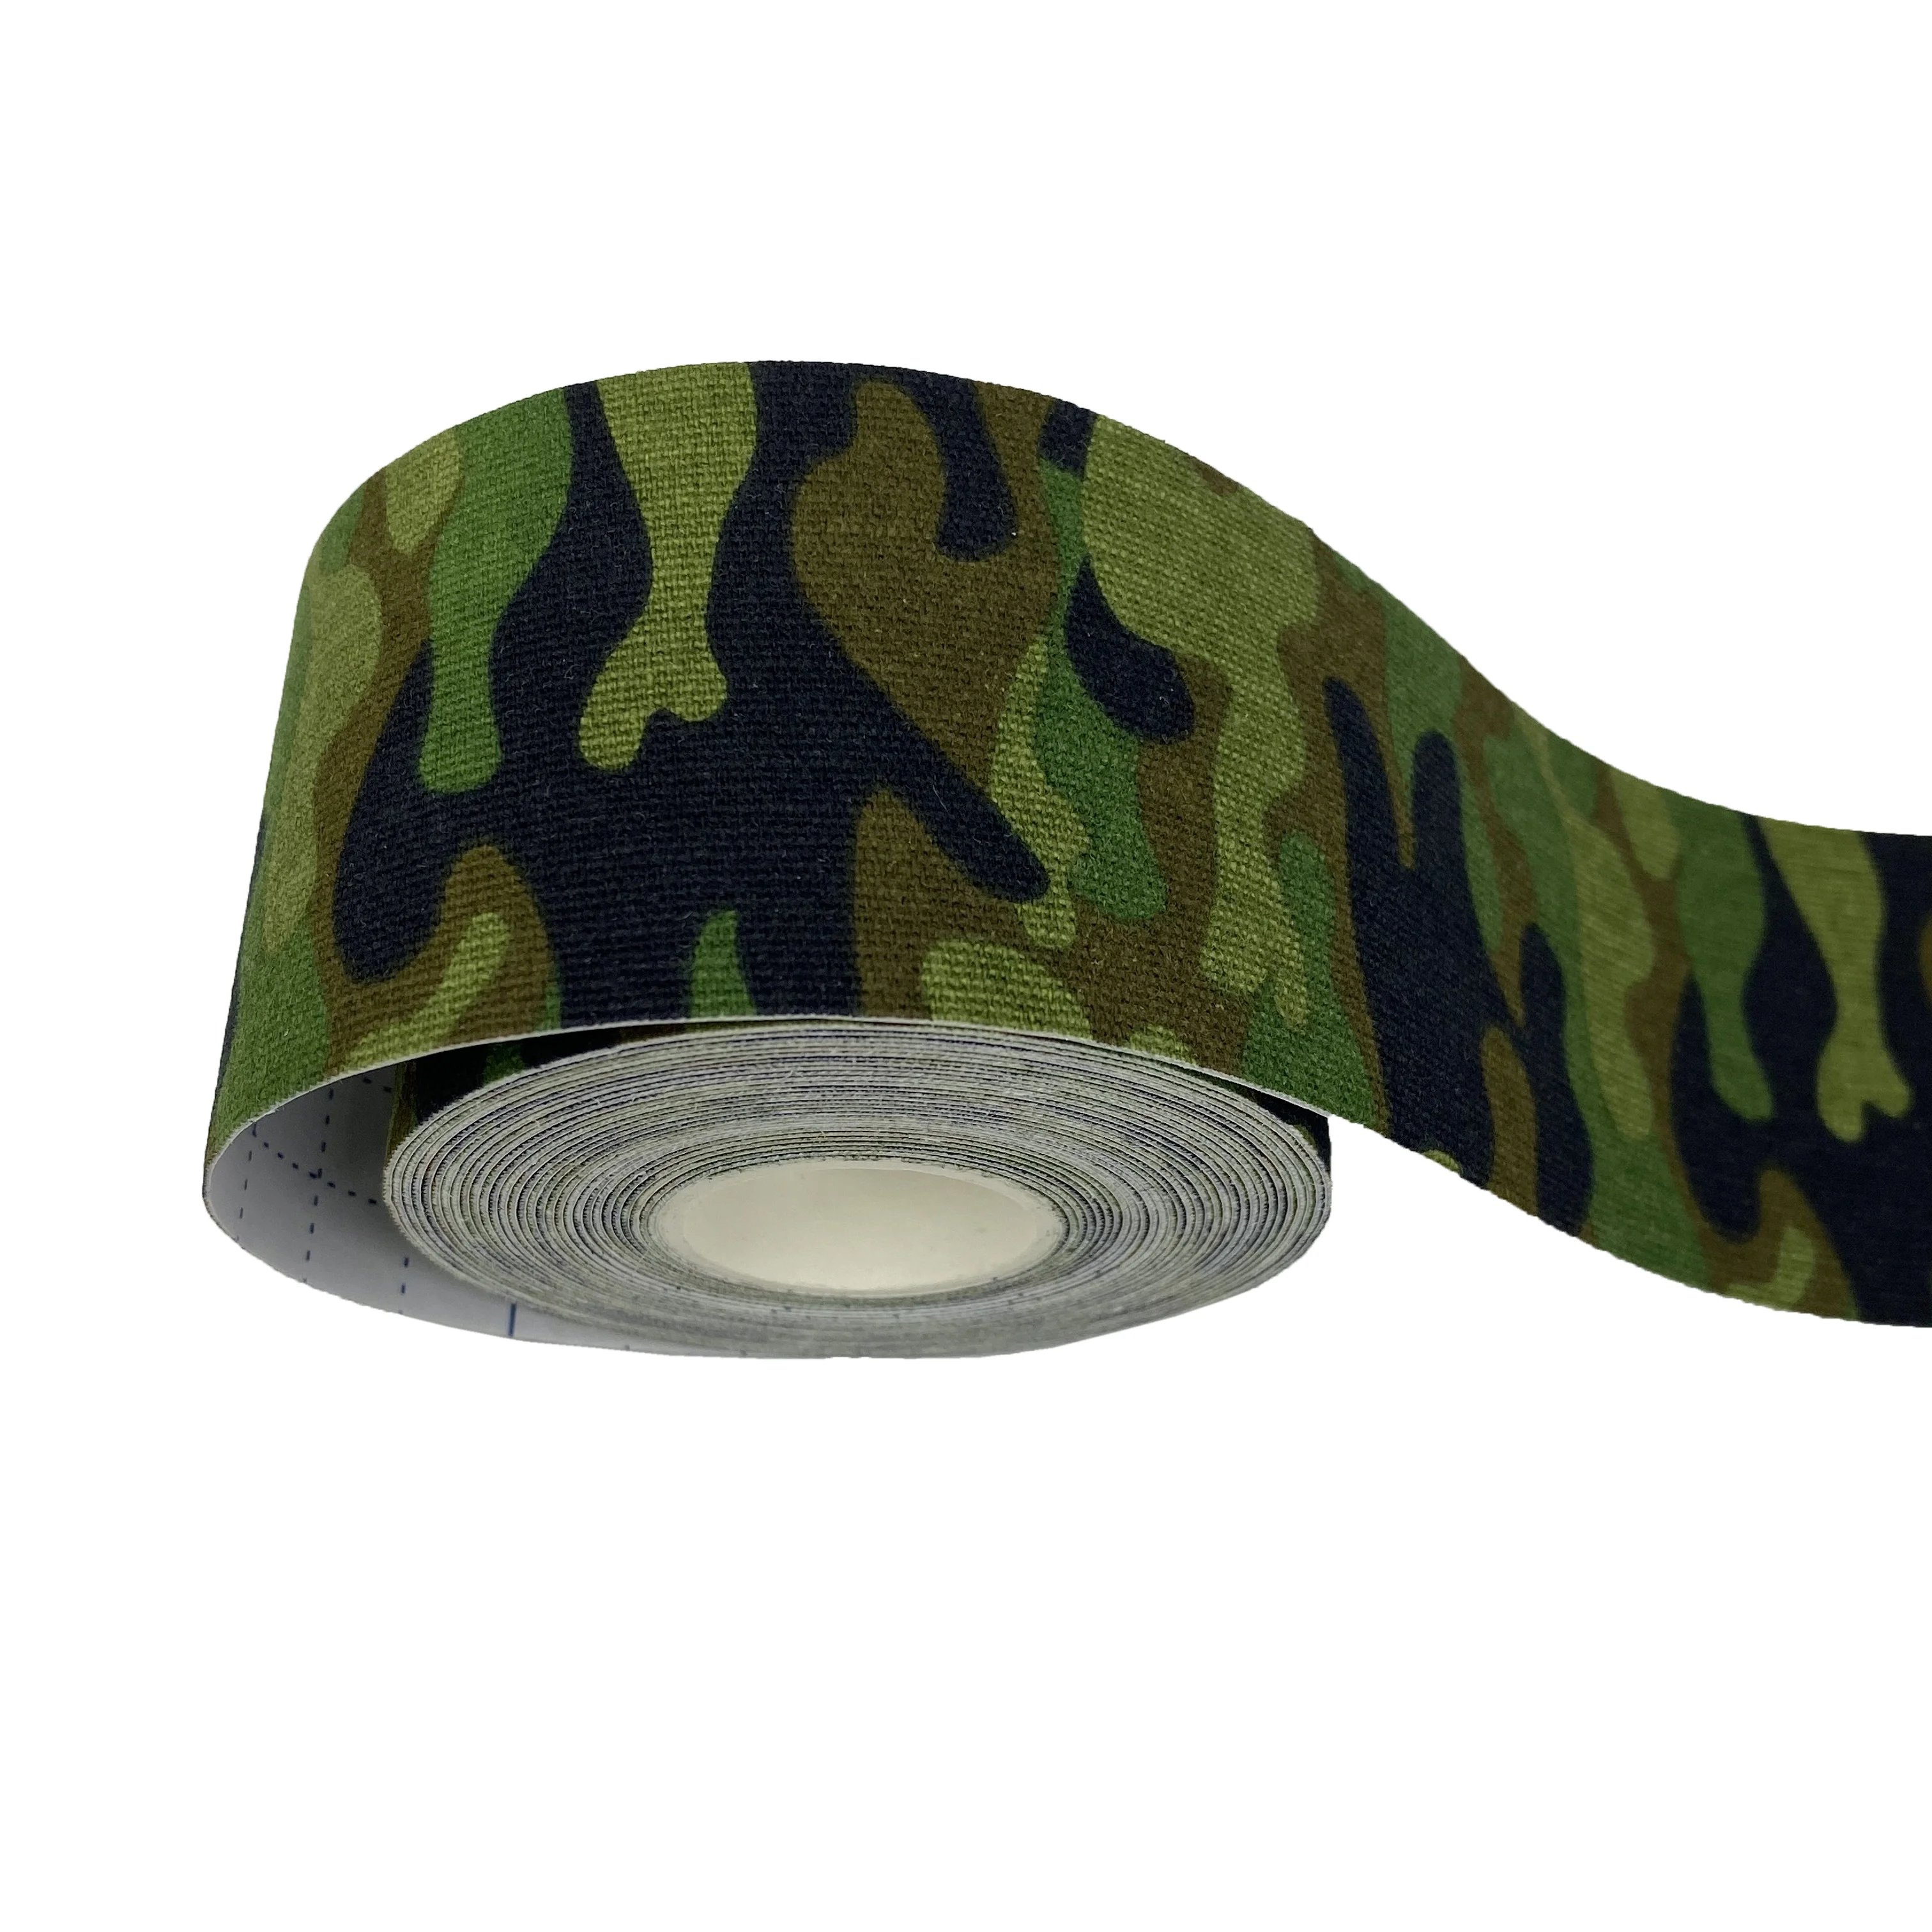 5cm*5m camouflage color Cotton Kinesiology Tape for Pain Relief